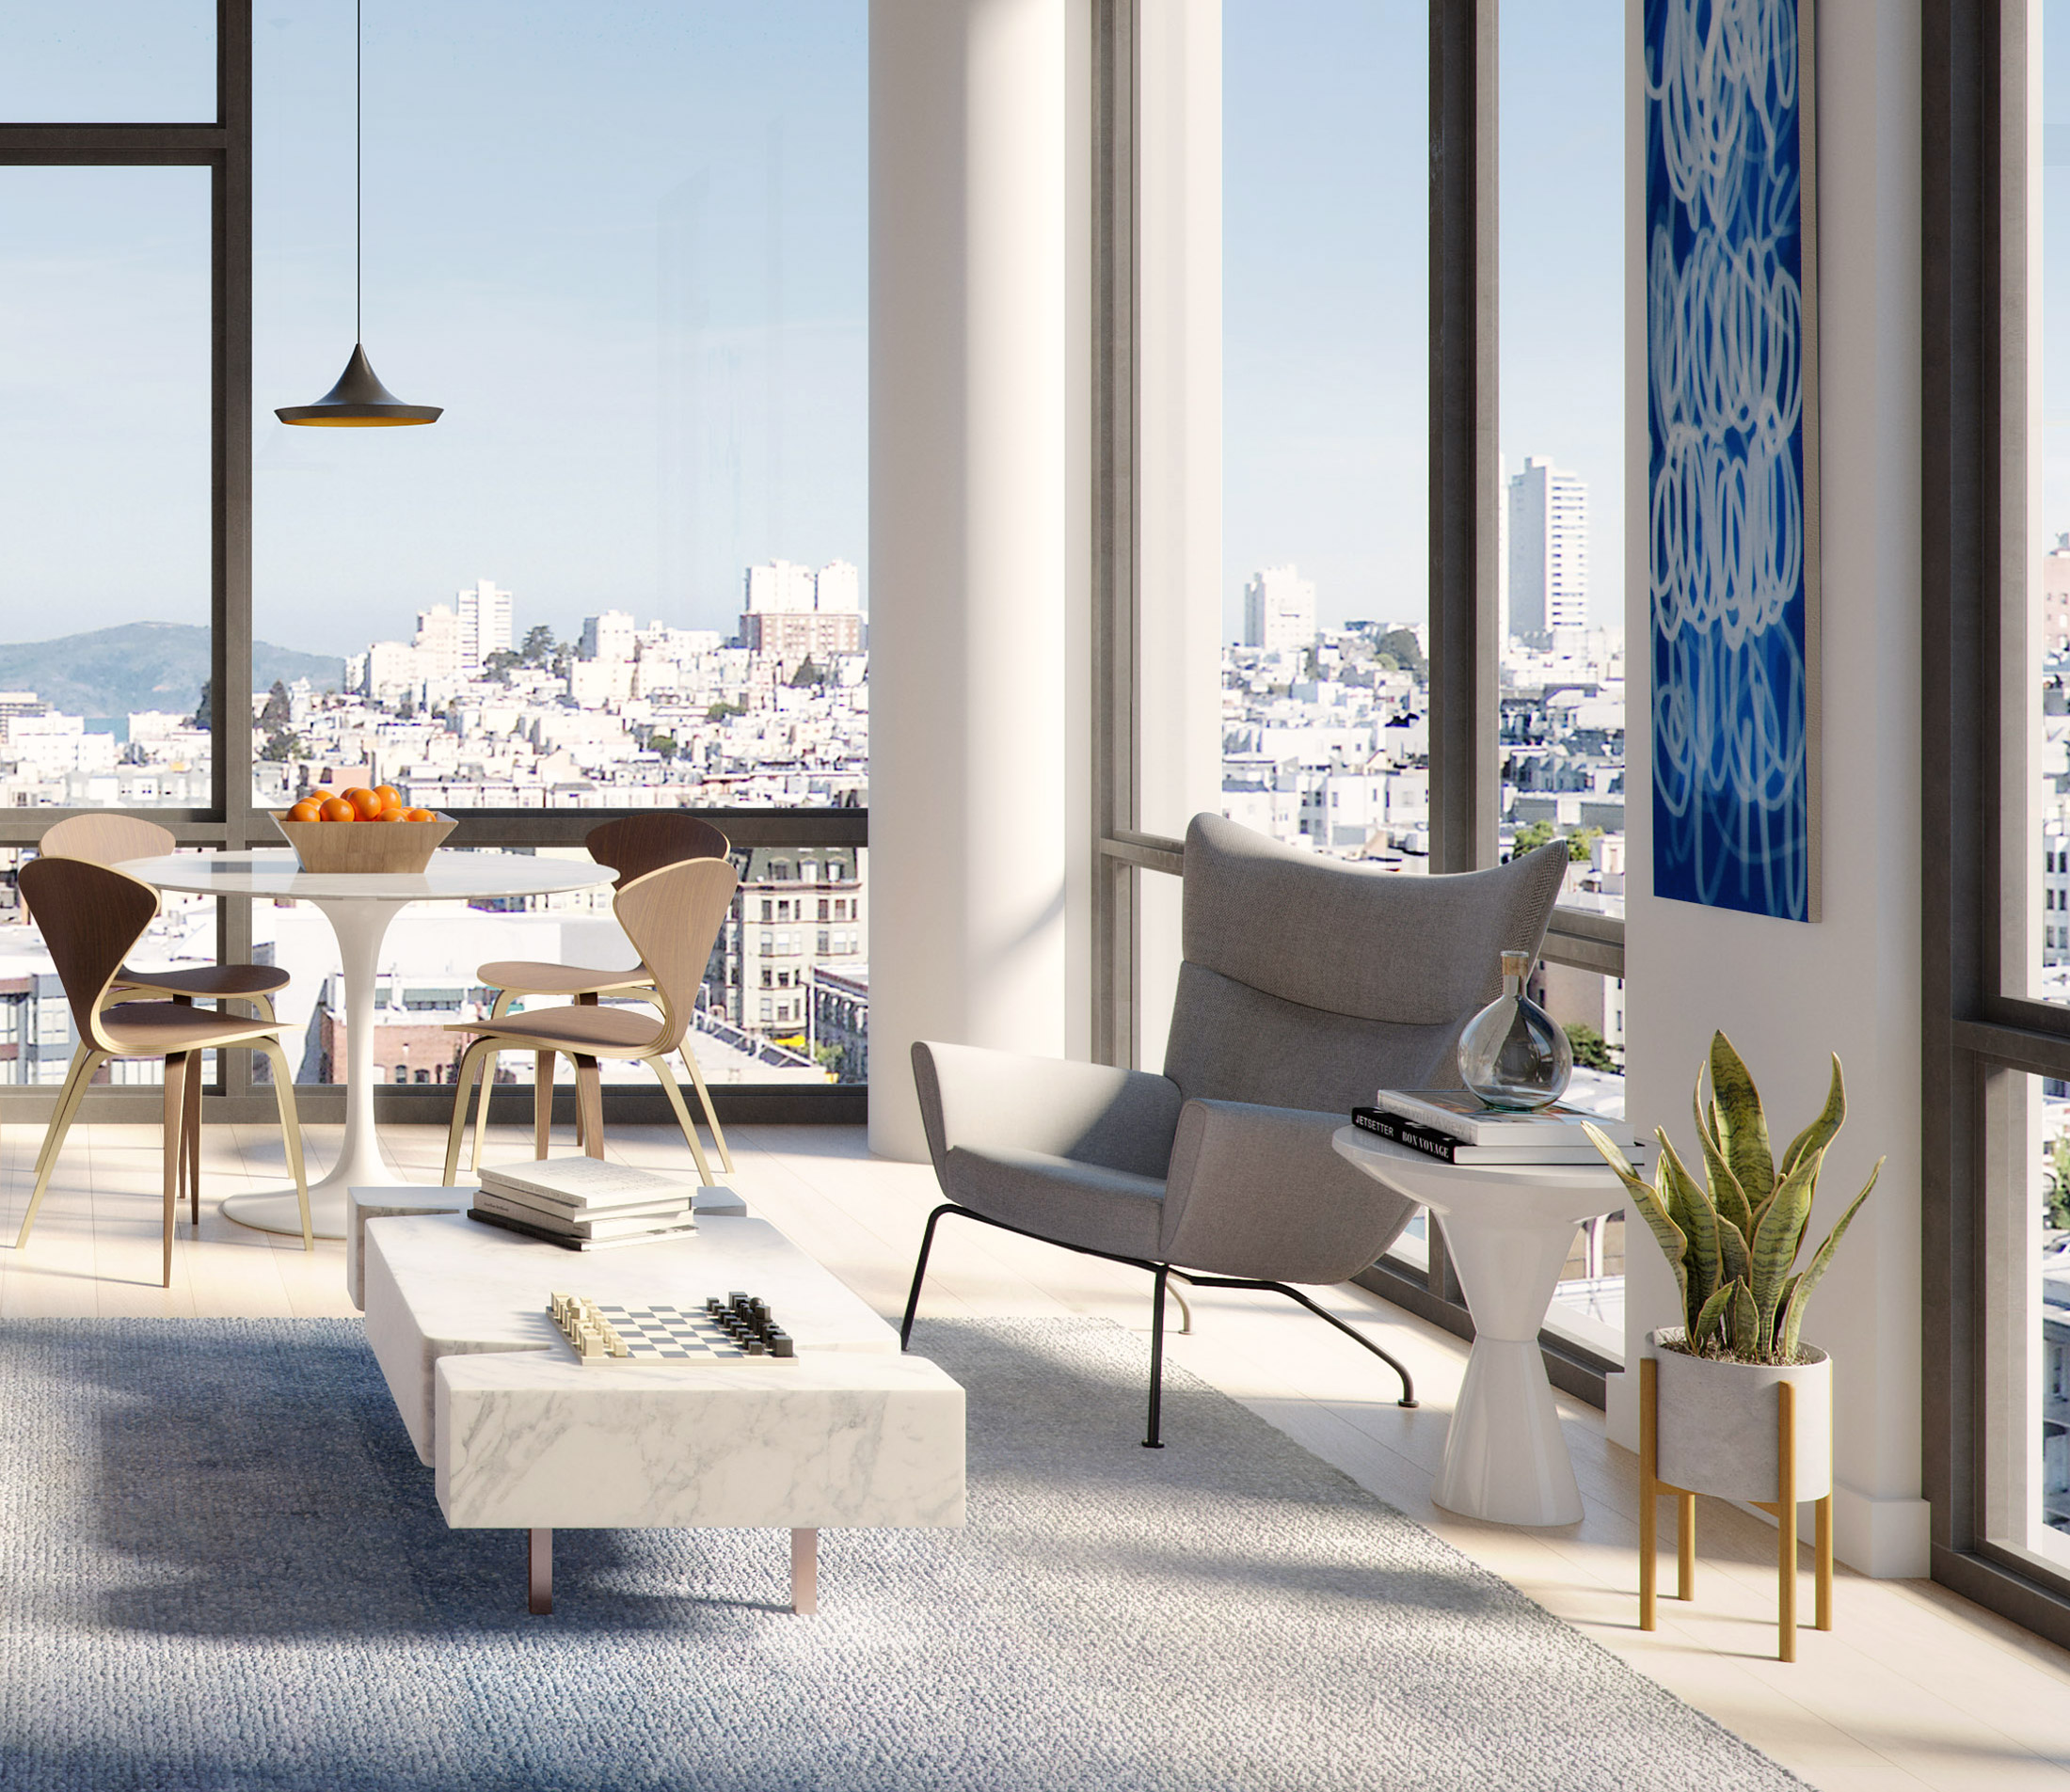 Architectural Rendering of the living room of the The Austin project located in San Francisco, California